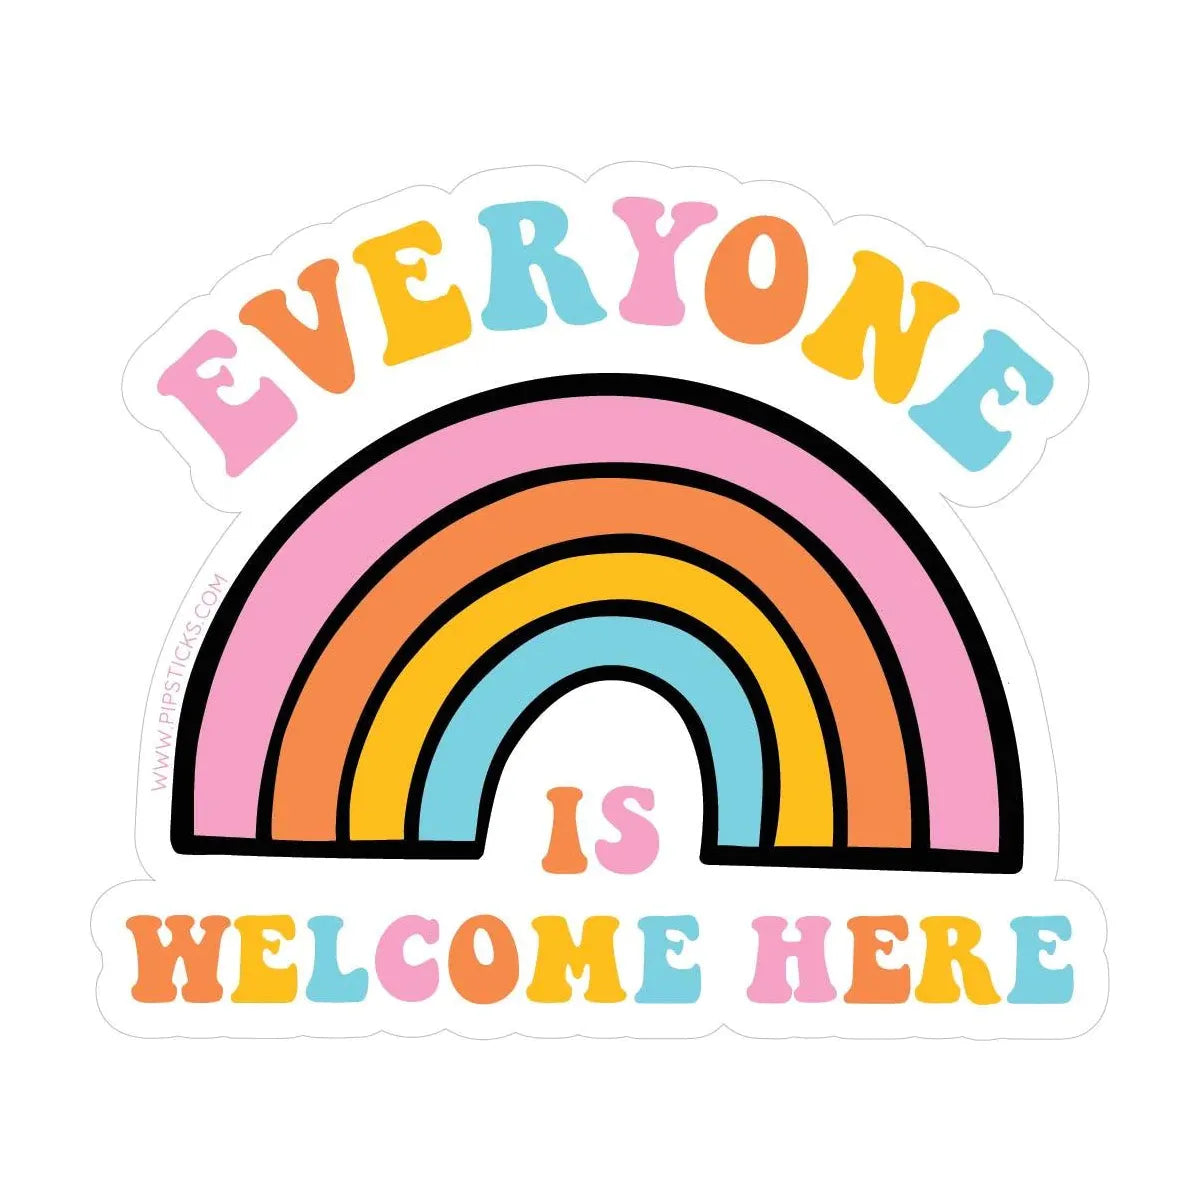 Everyone is Welcome Here Vinyl Sticker